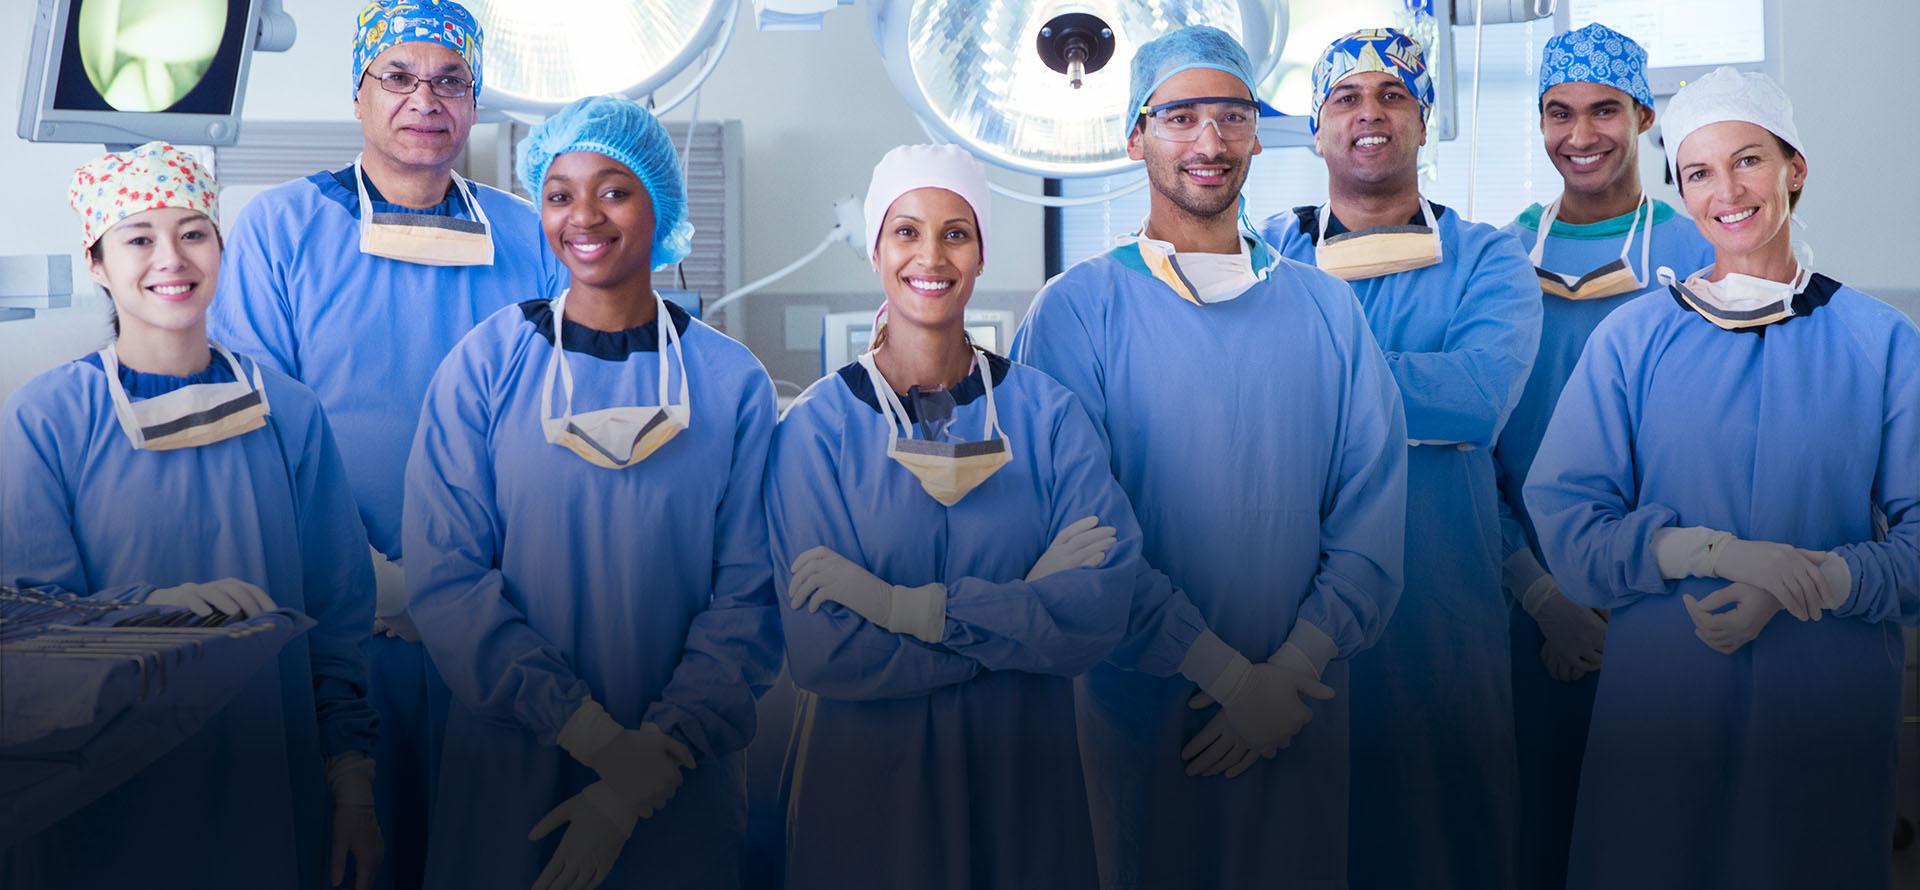 A group of smiling people in blue OR gear in an operating room